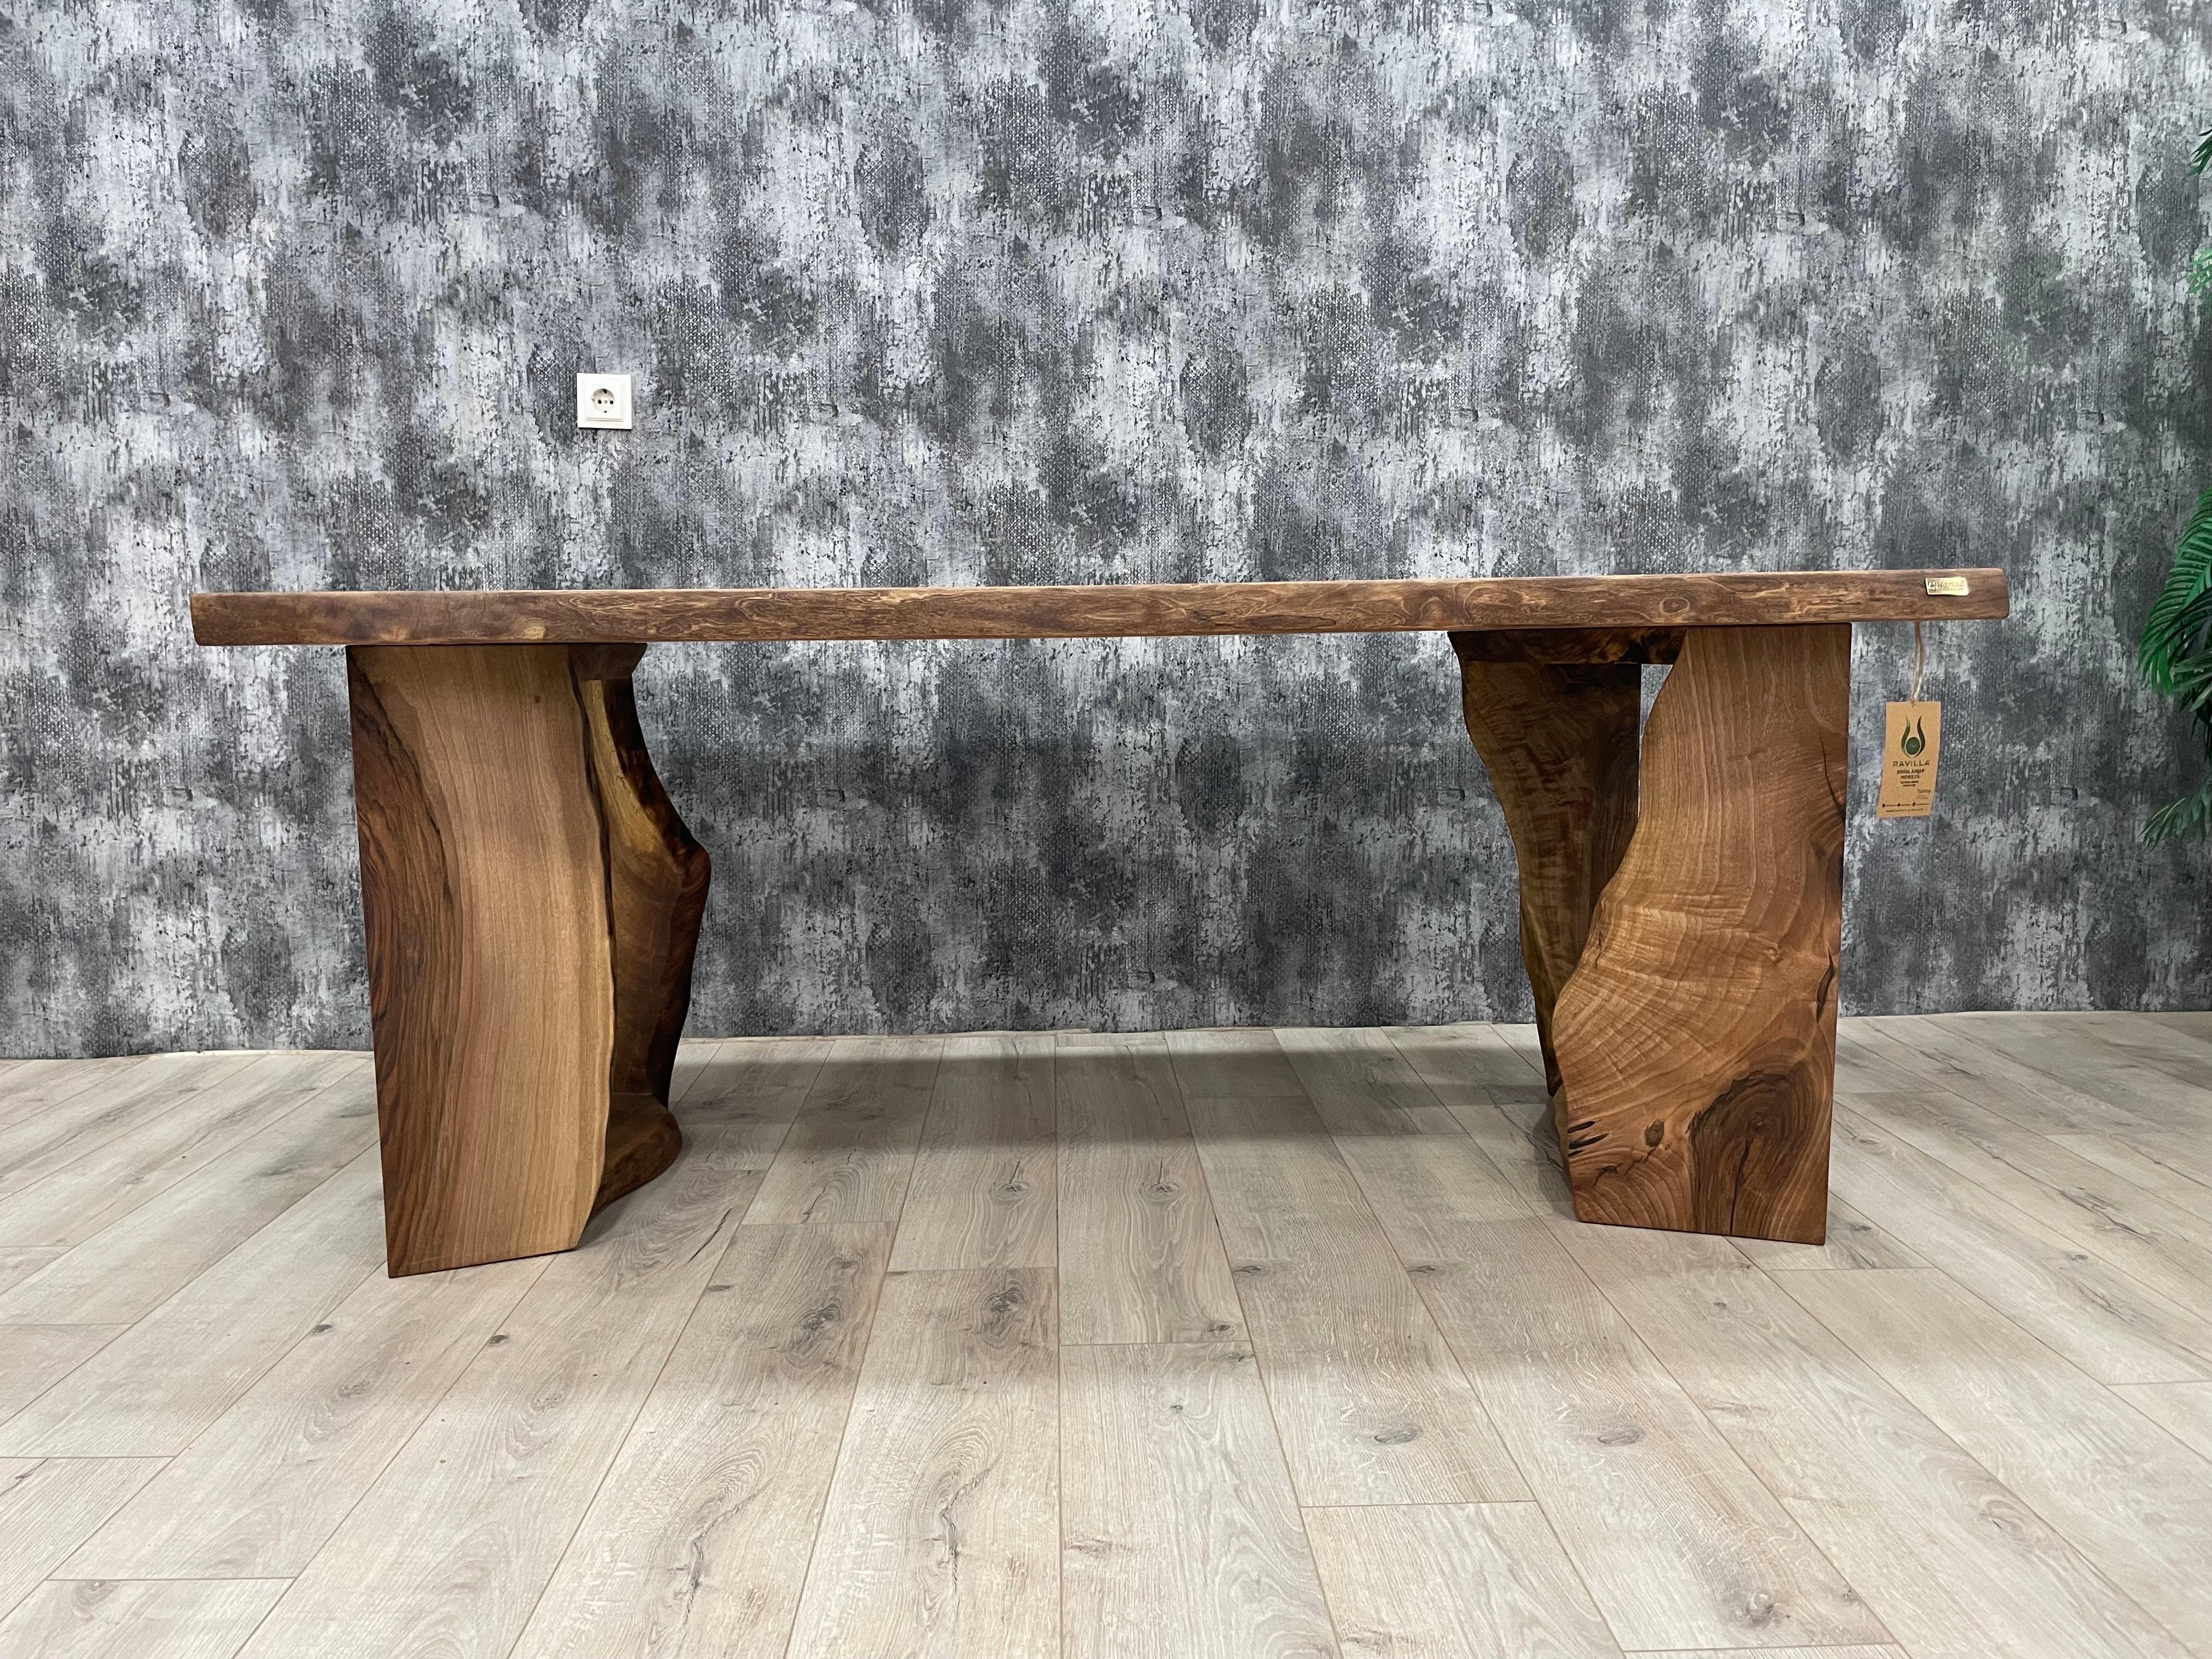 Turkish Rectangular Natural Form Pedestal Dining Table, Solid Walnut Wood, Made to Order For Sale